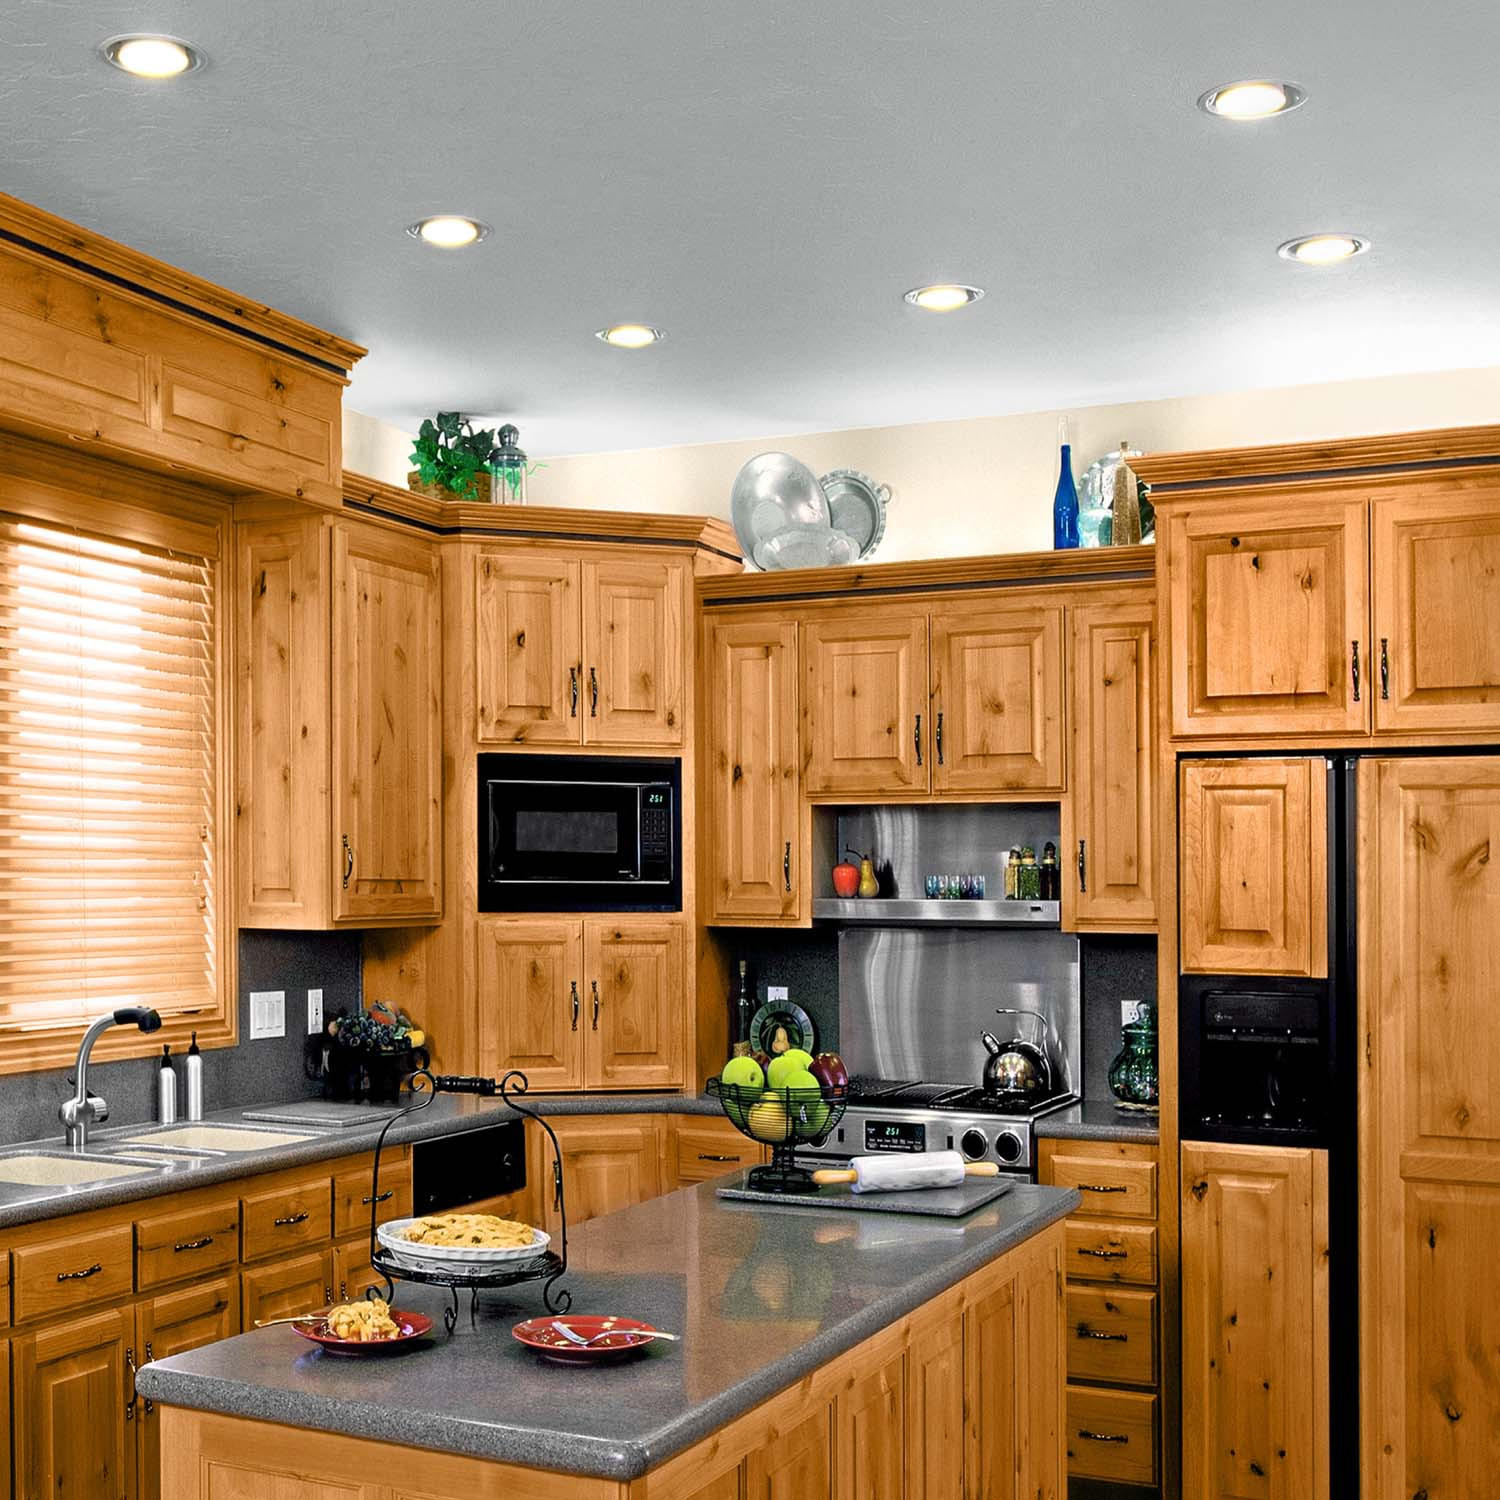 Recessed Lighting Kitchen
 10 benefits of Led ceiling recessed lights